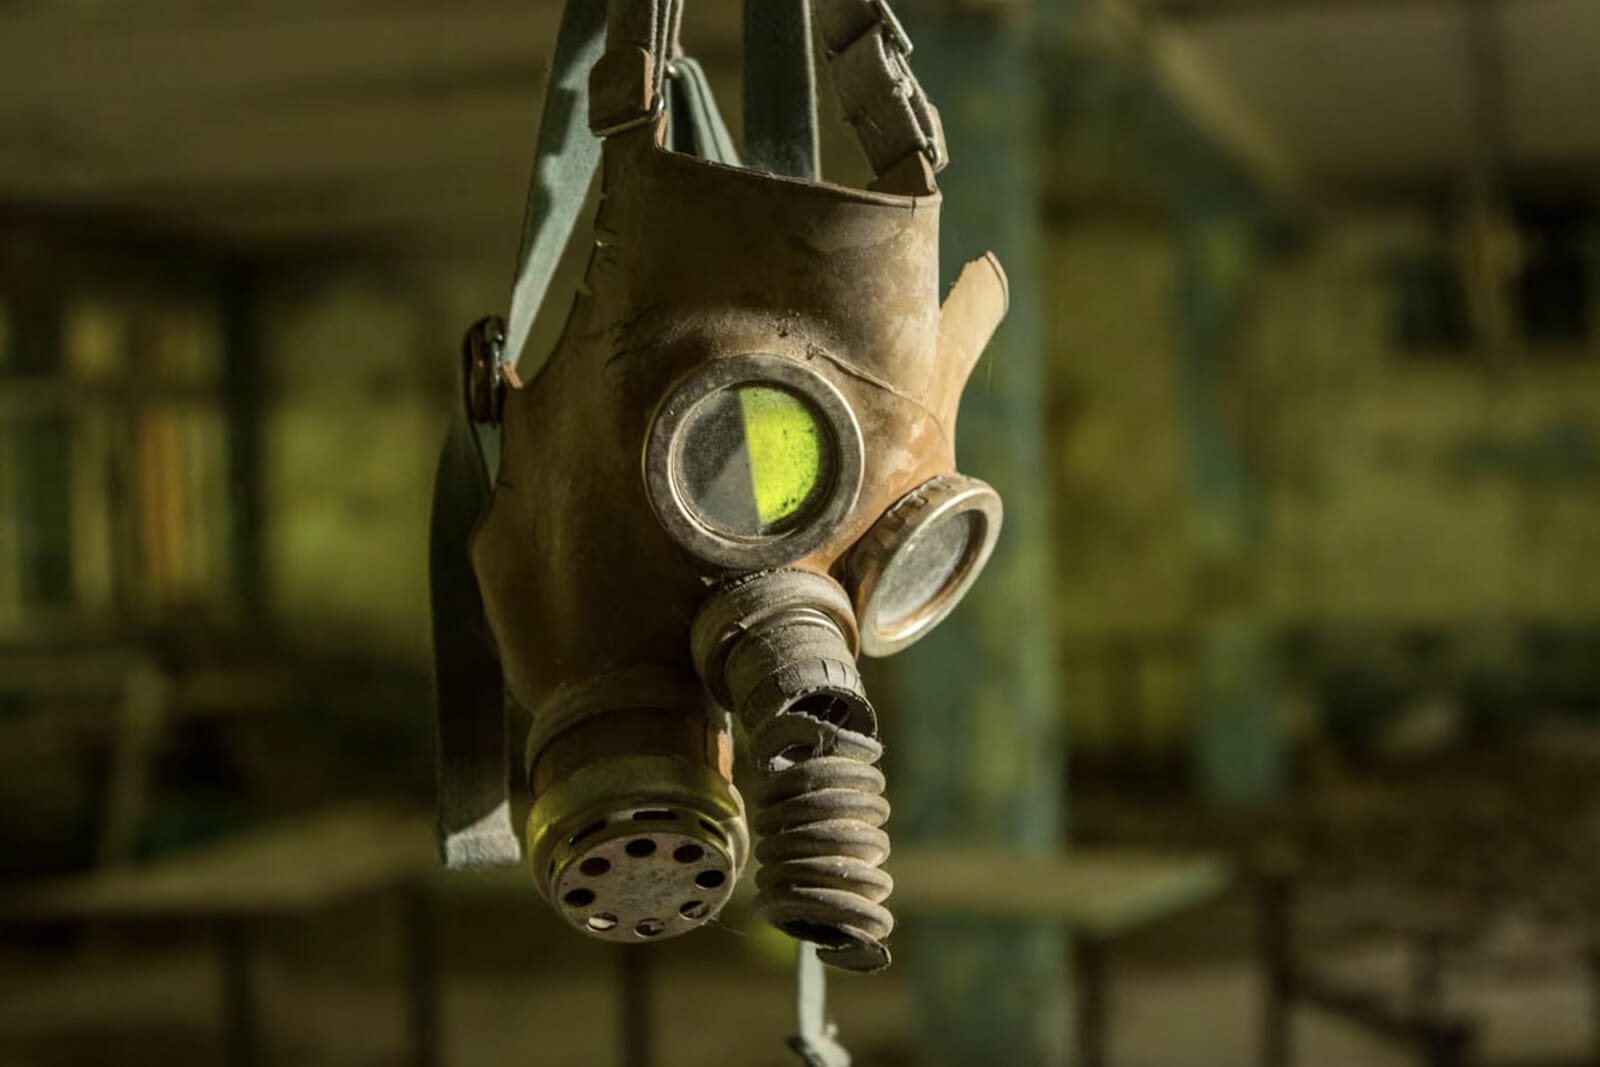 A gas mask hanging by its strap